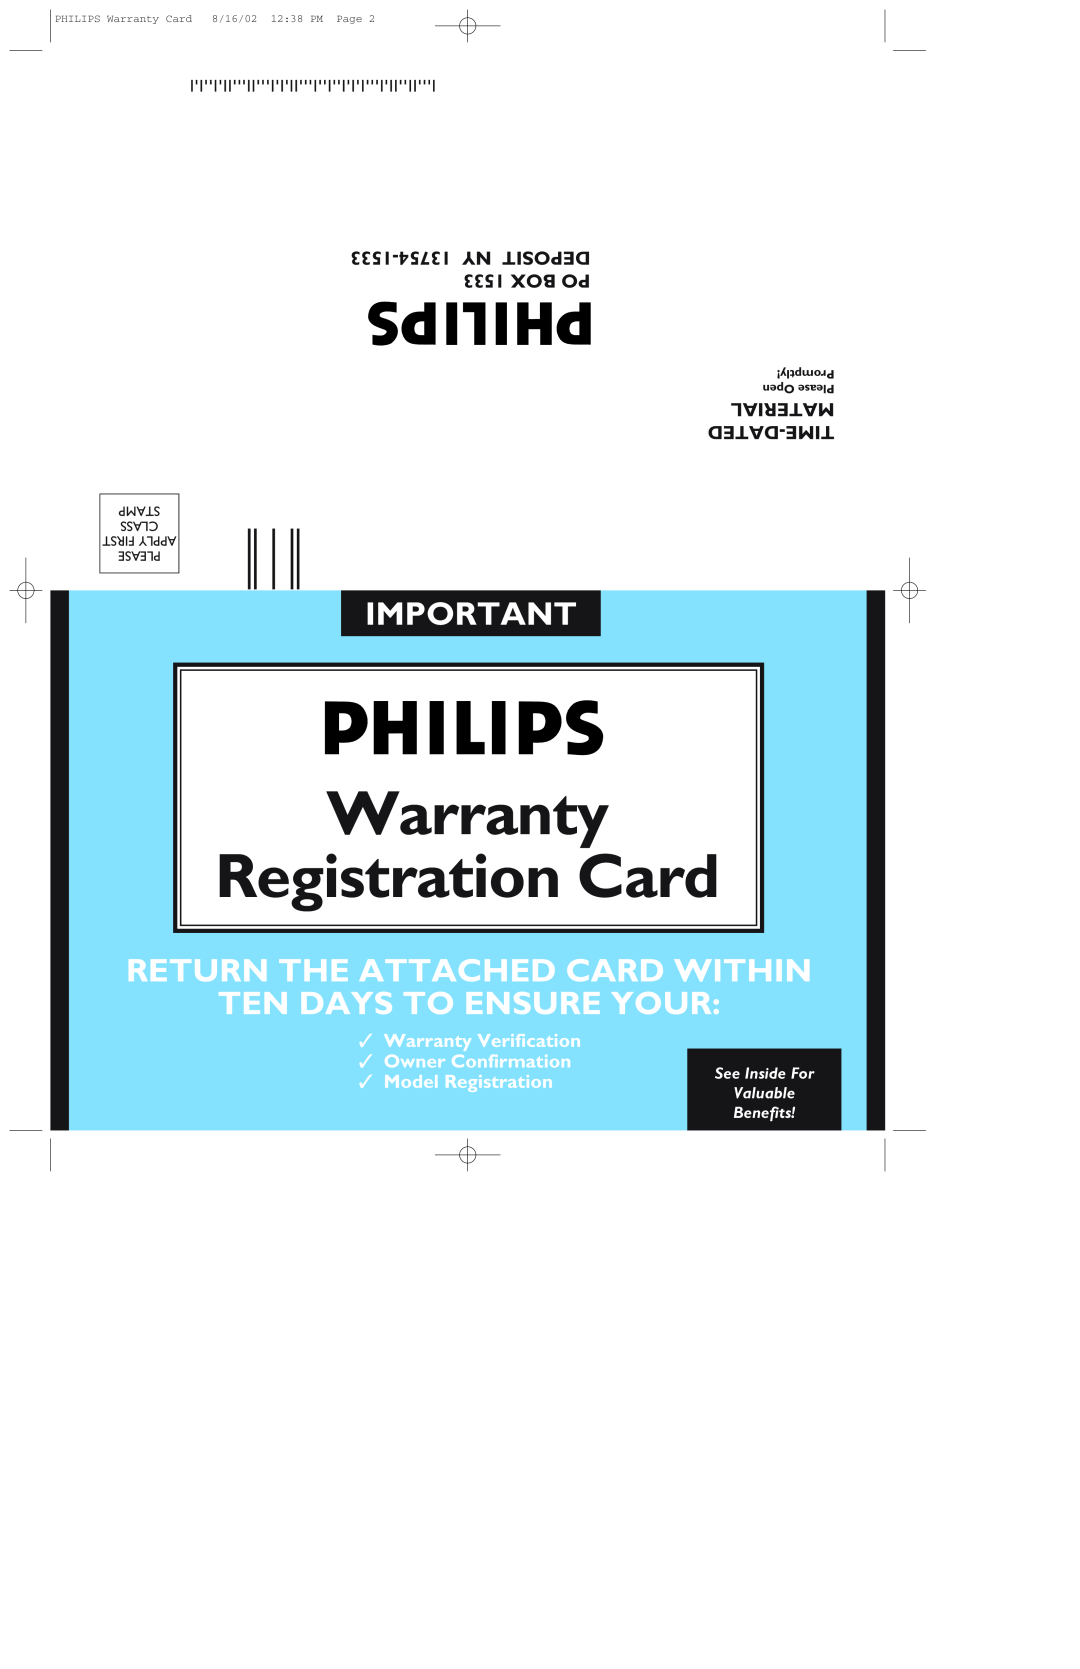 Philips 109F5 1533-13754NY DEPOSIT, Box Po, Material, Dated-Time, Warranty, Registration Card, Ten Days To Ensure Your 